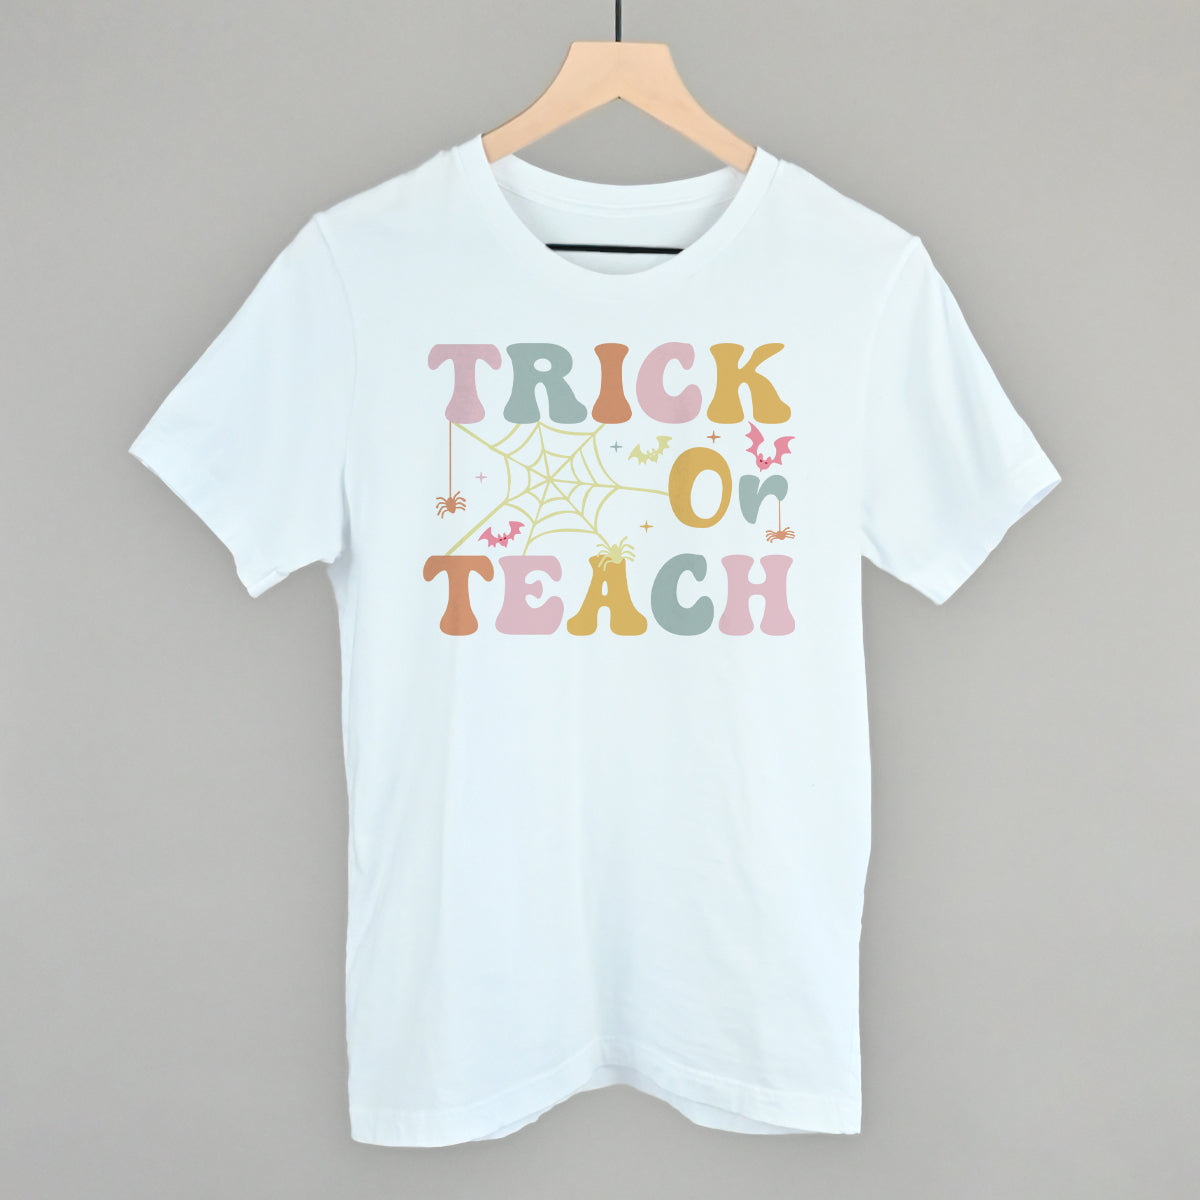 Trick or Teach Colorful